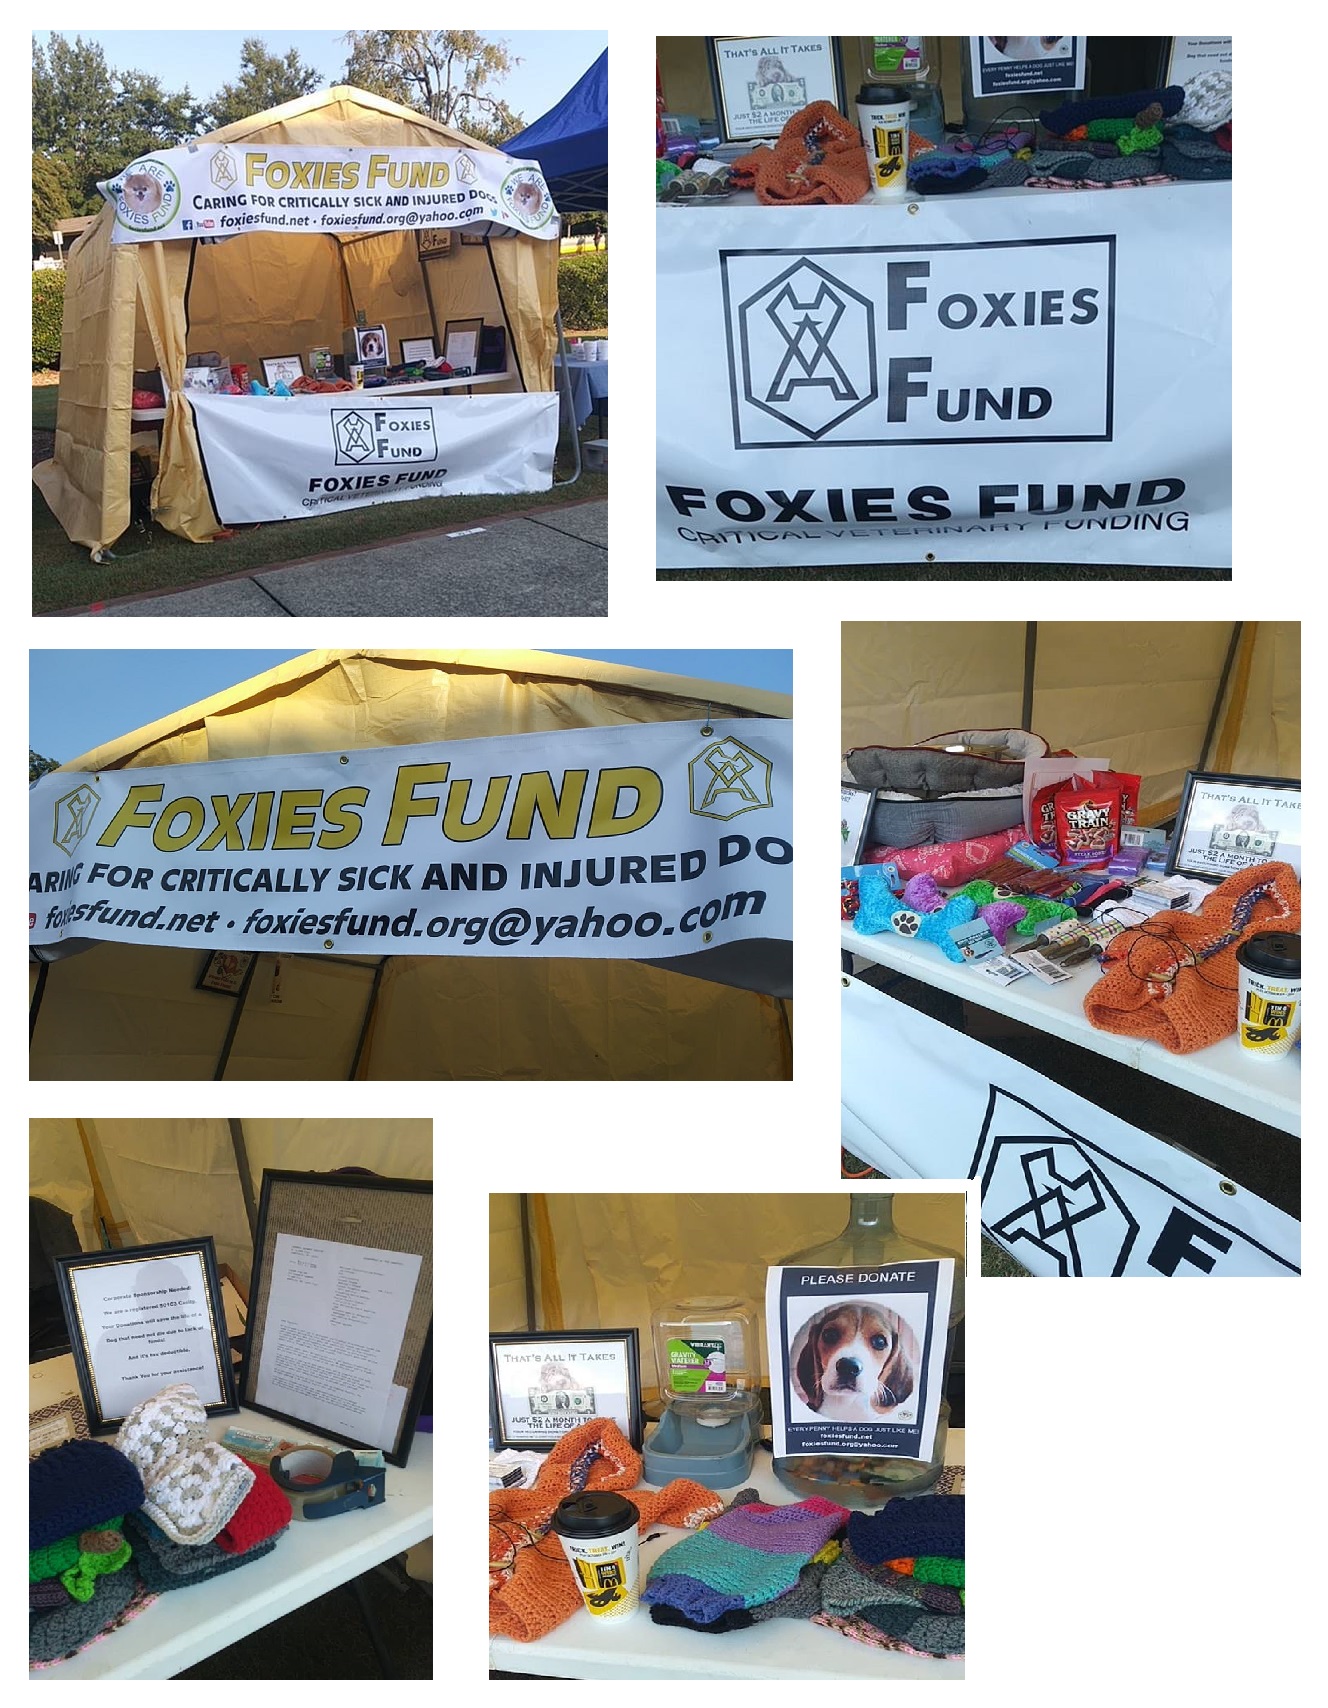 Foxies Fund Stall @Norcross Festival